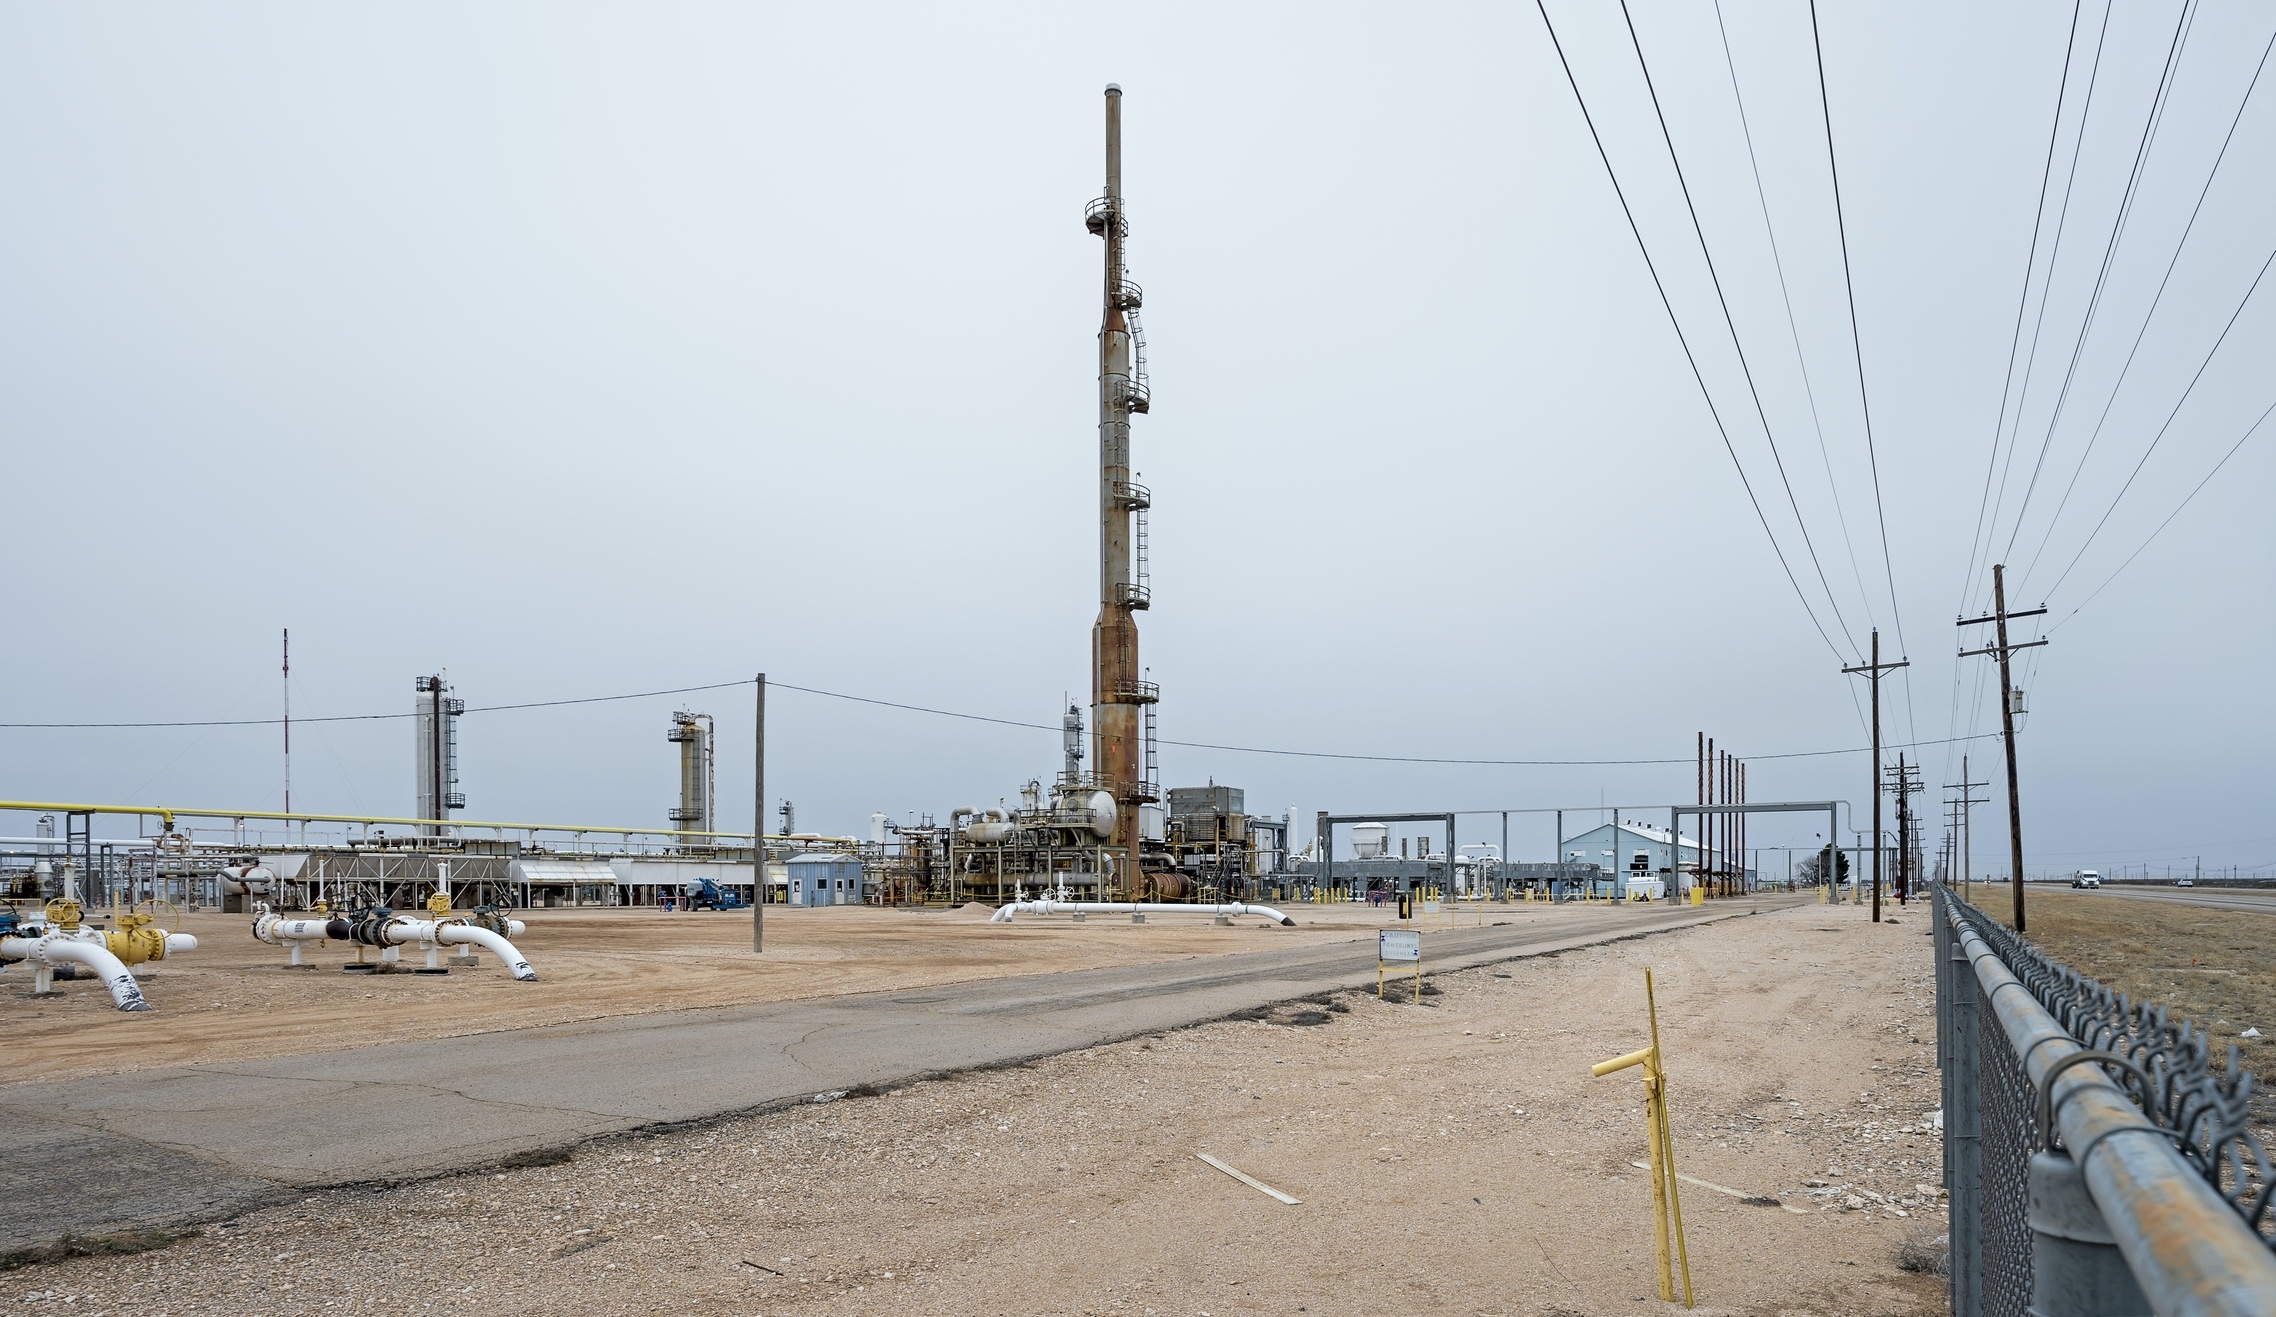 oil and natural gas infrastructure in the Permian Basin